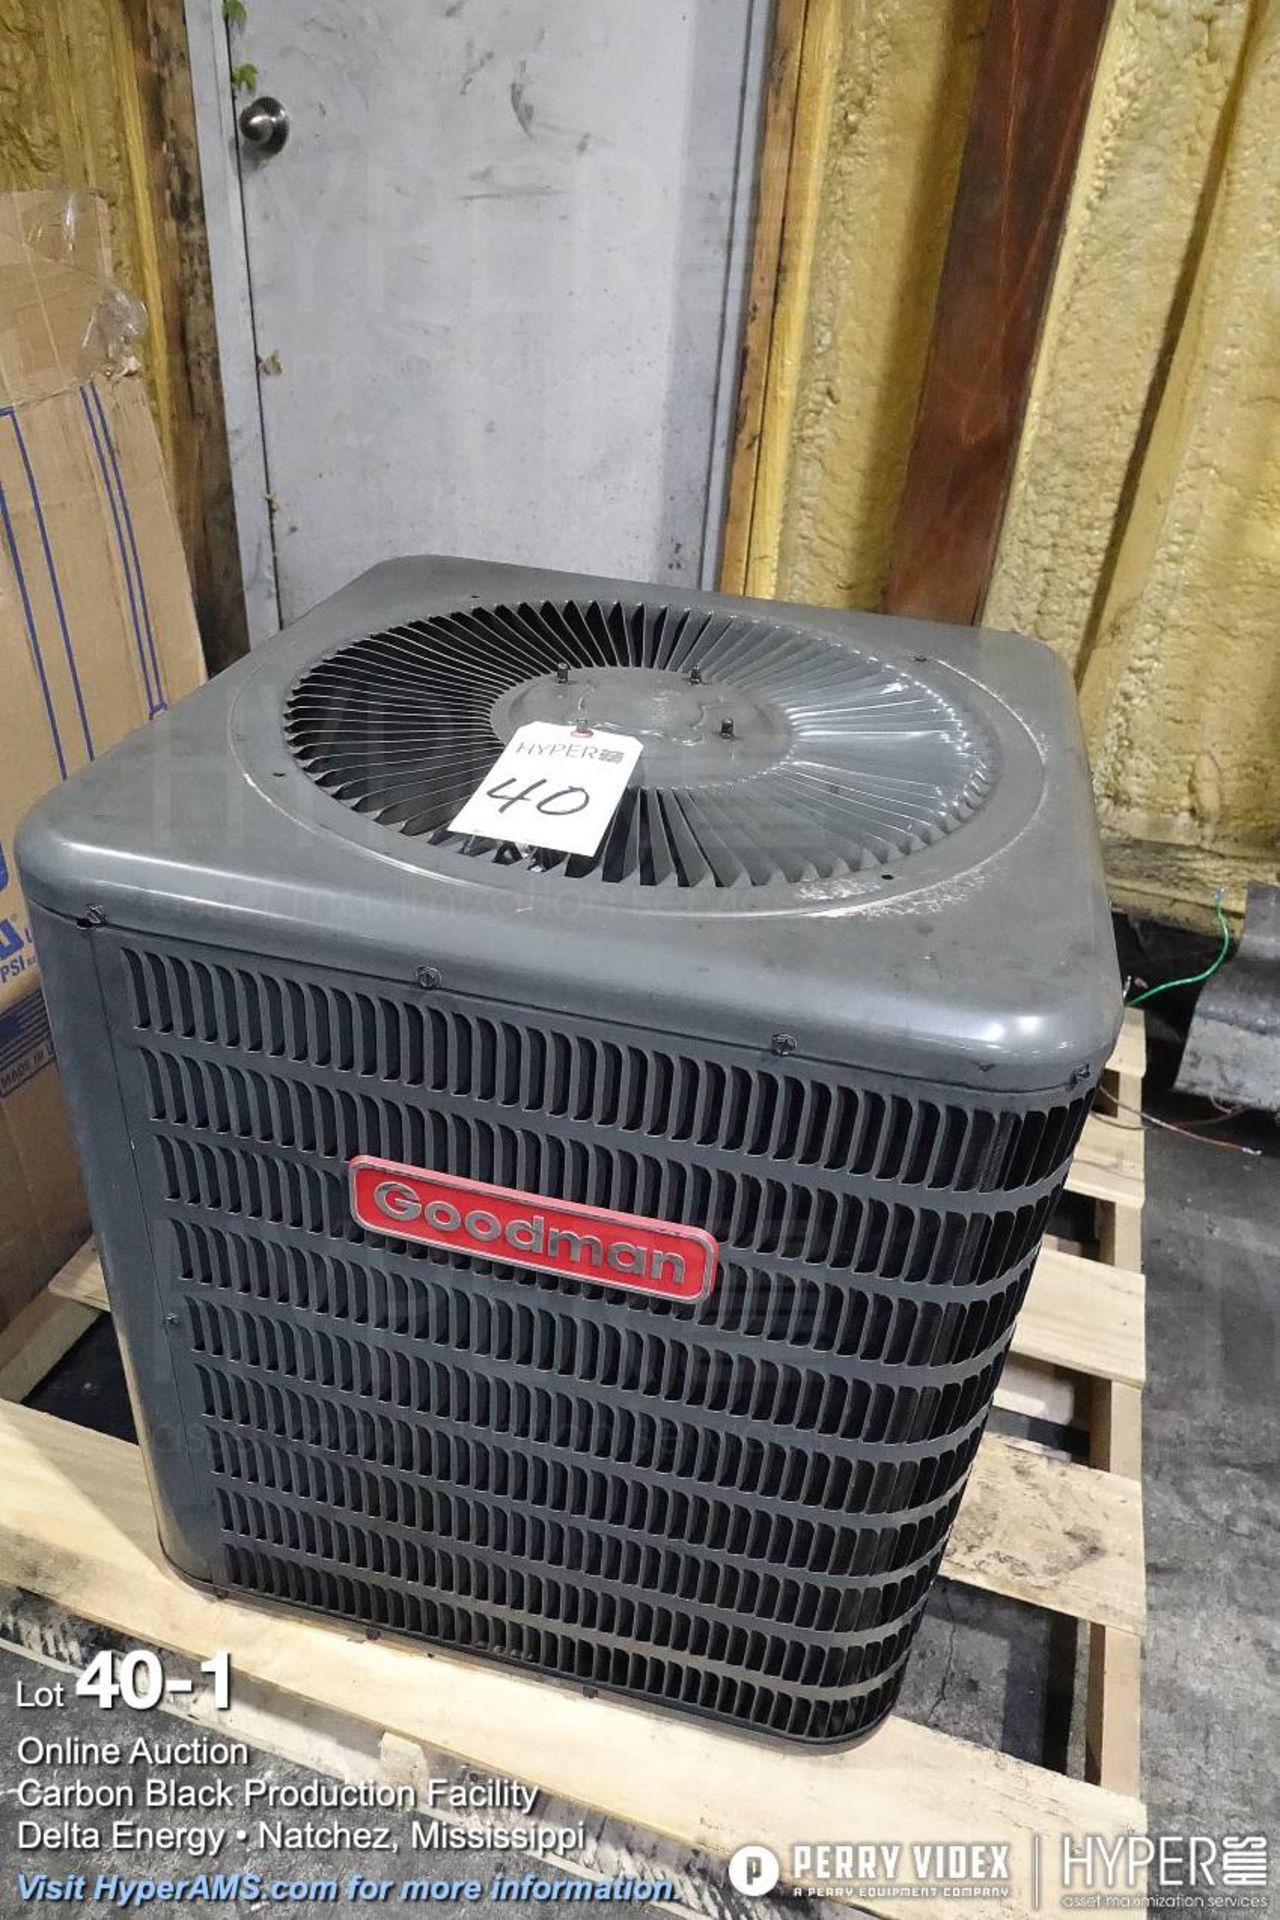 Goodman BSX140181MA A/C unit and blower - unused